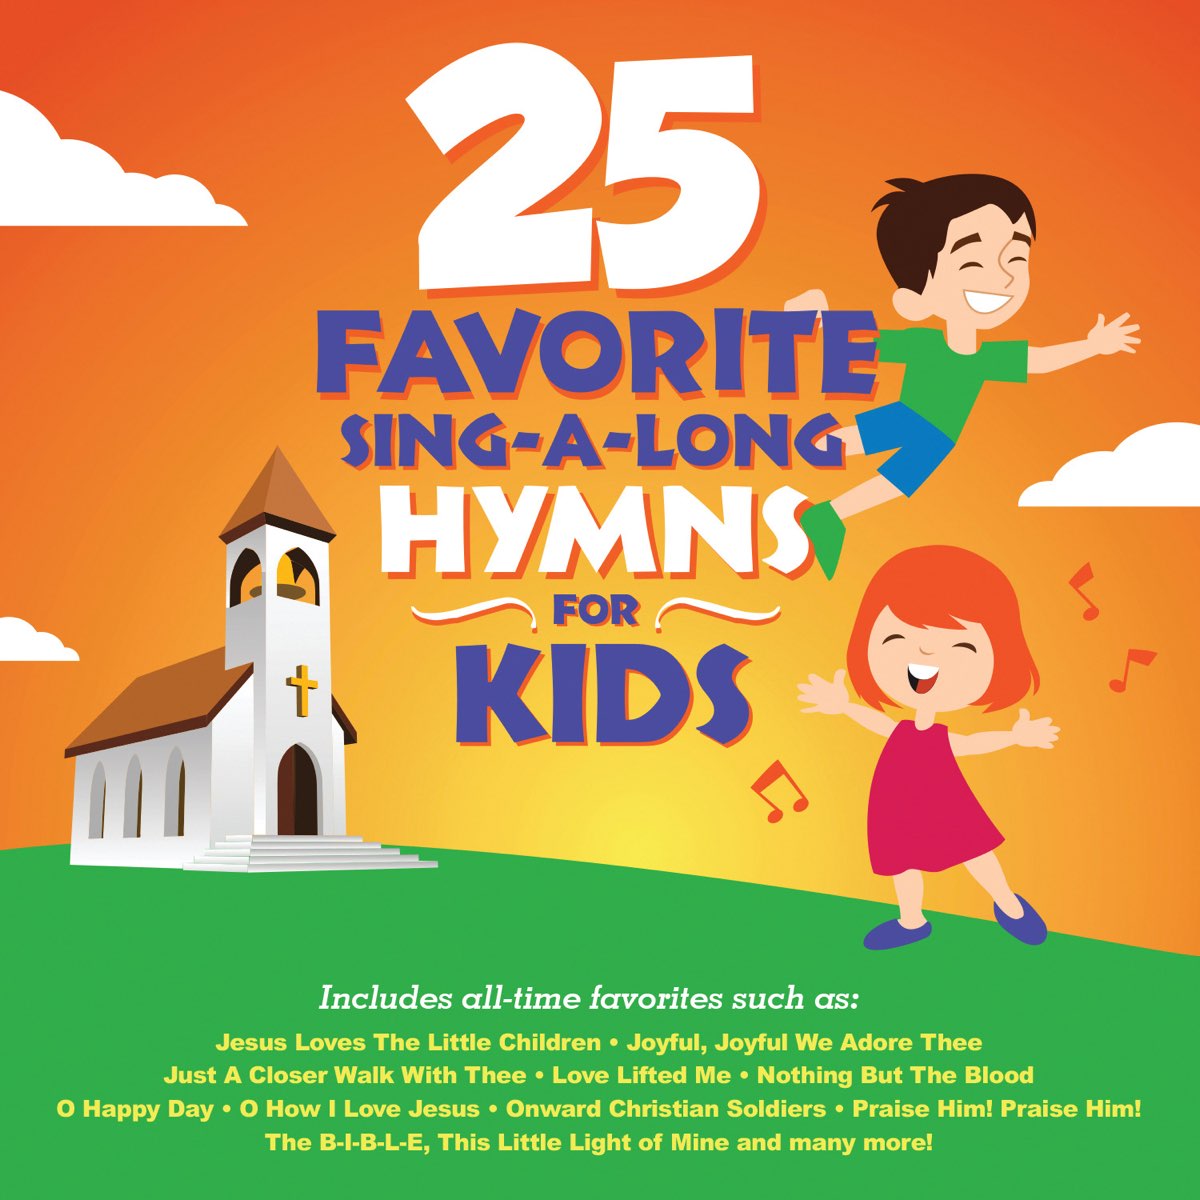 ‎Sing-A-Long Praise: Shout Sing Clap! by Integrity Kids on Apple Music